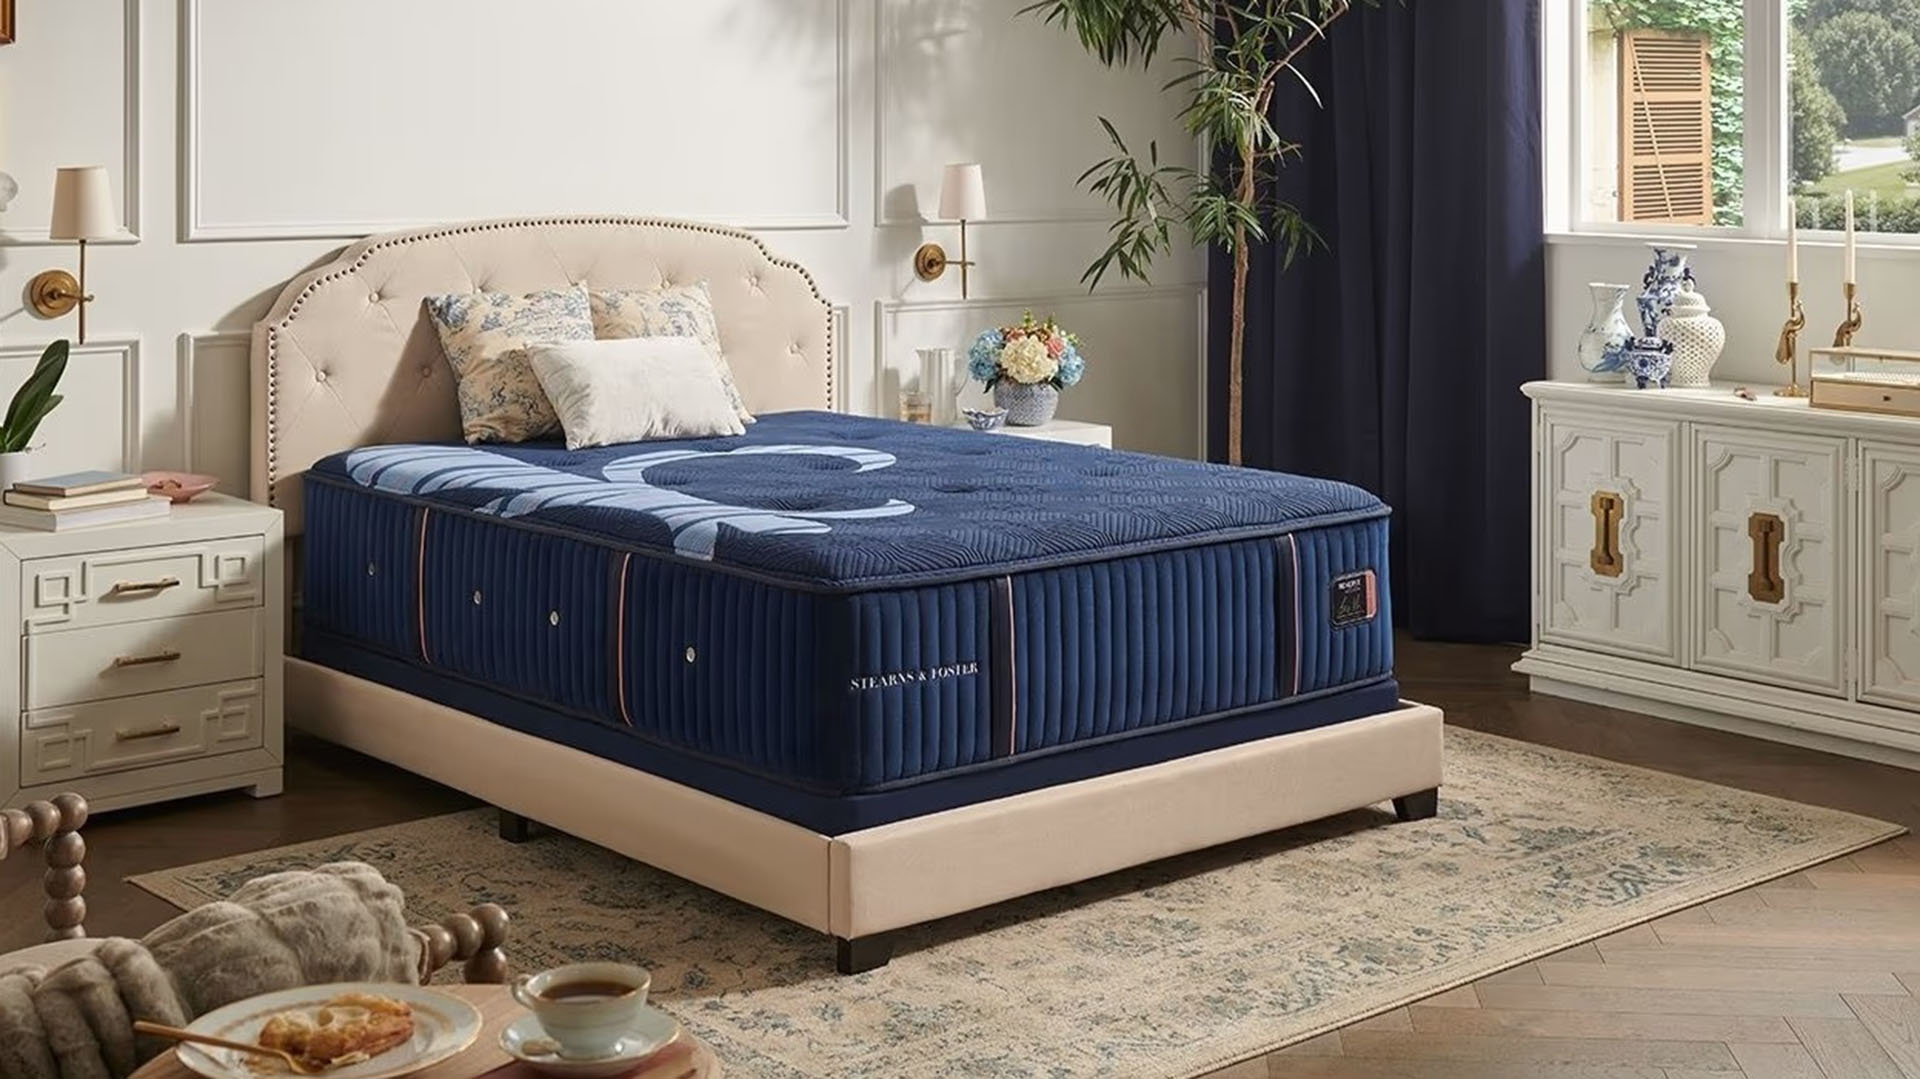 Stearns & Foster mattresses in Palm Coast are designed with comfort and support in mind.